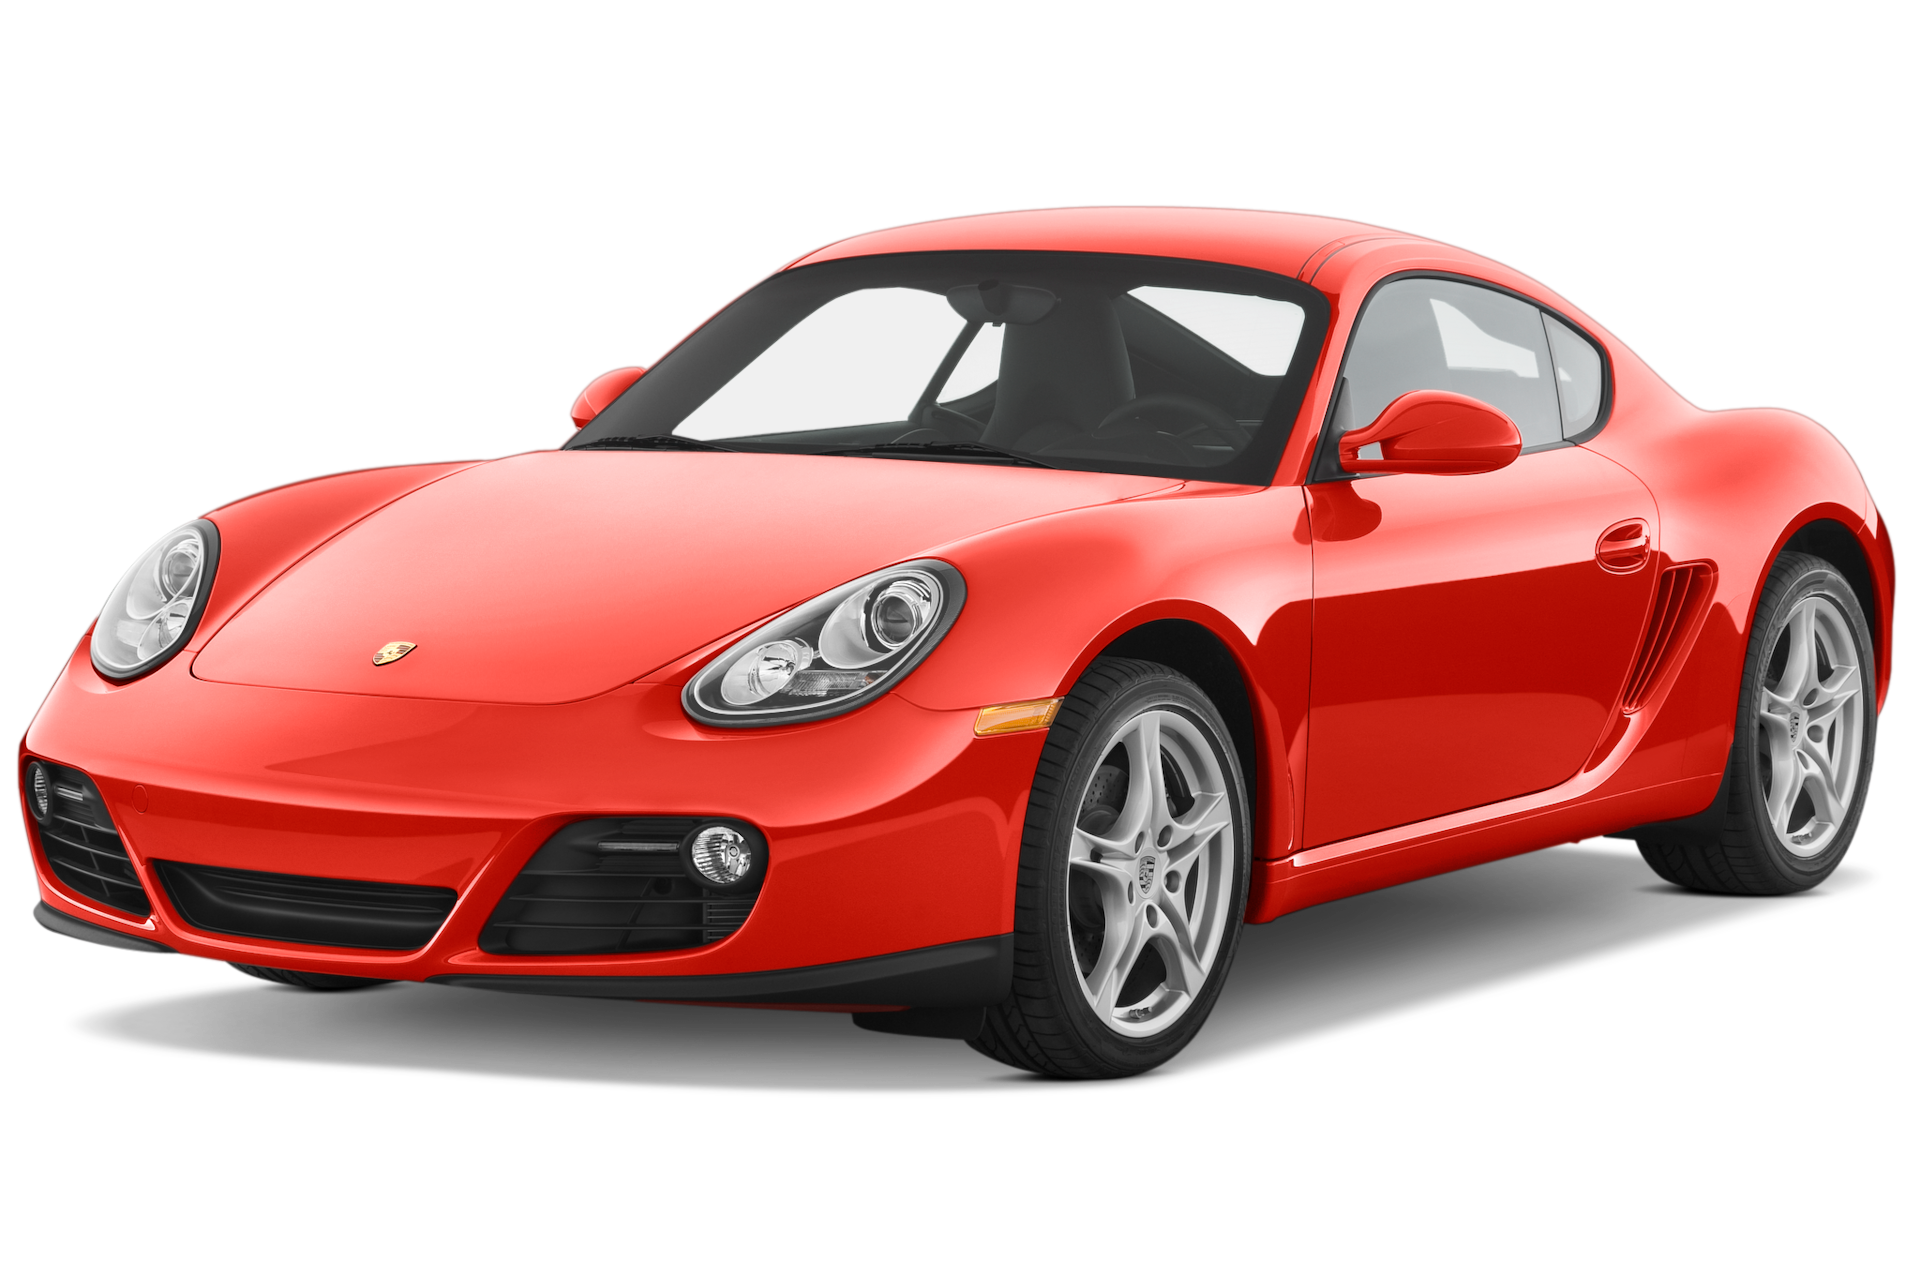 2010 Porsche Cayman Prices, Reviews, and Photos - MotorTrend